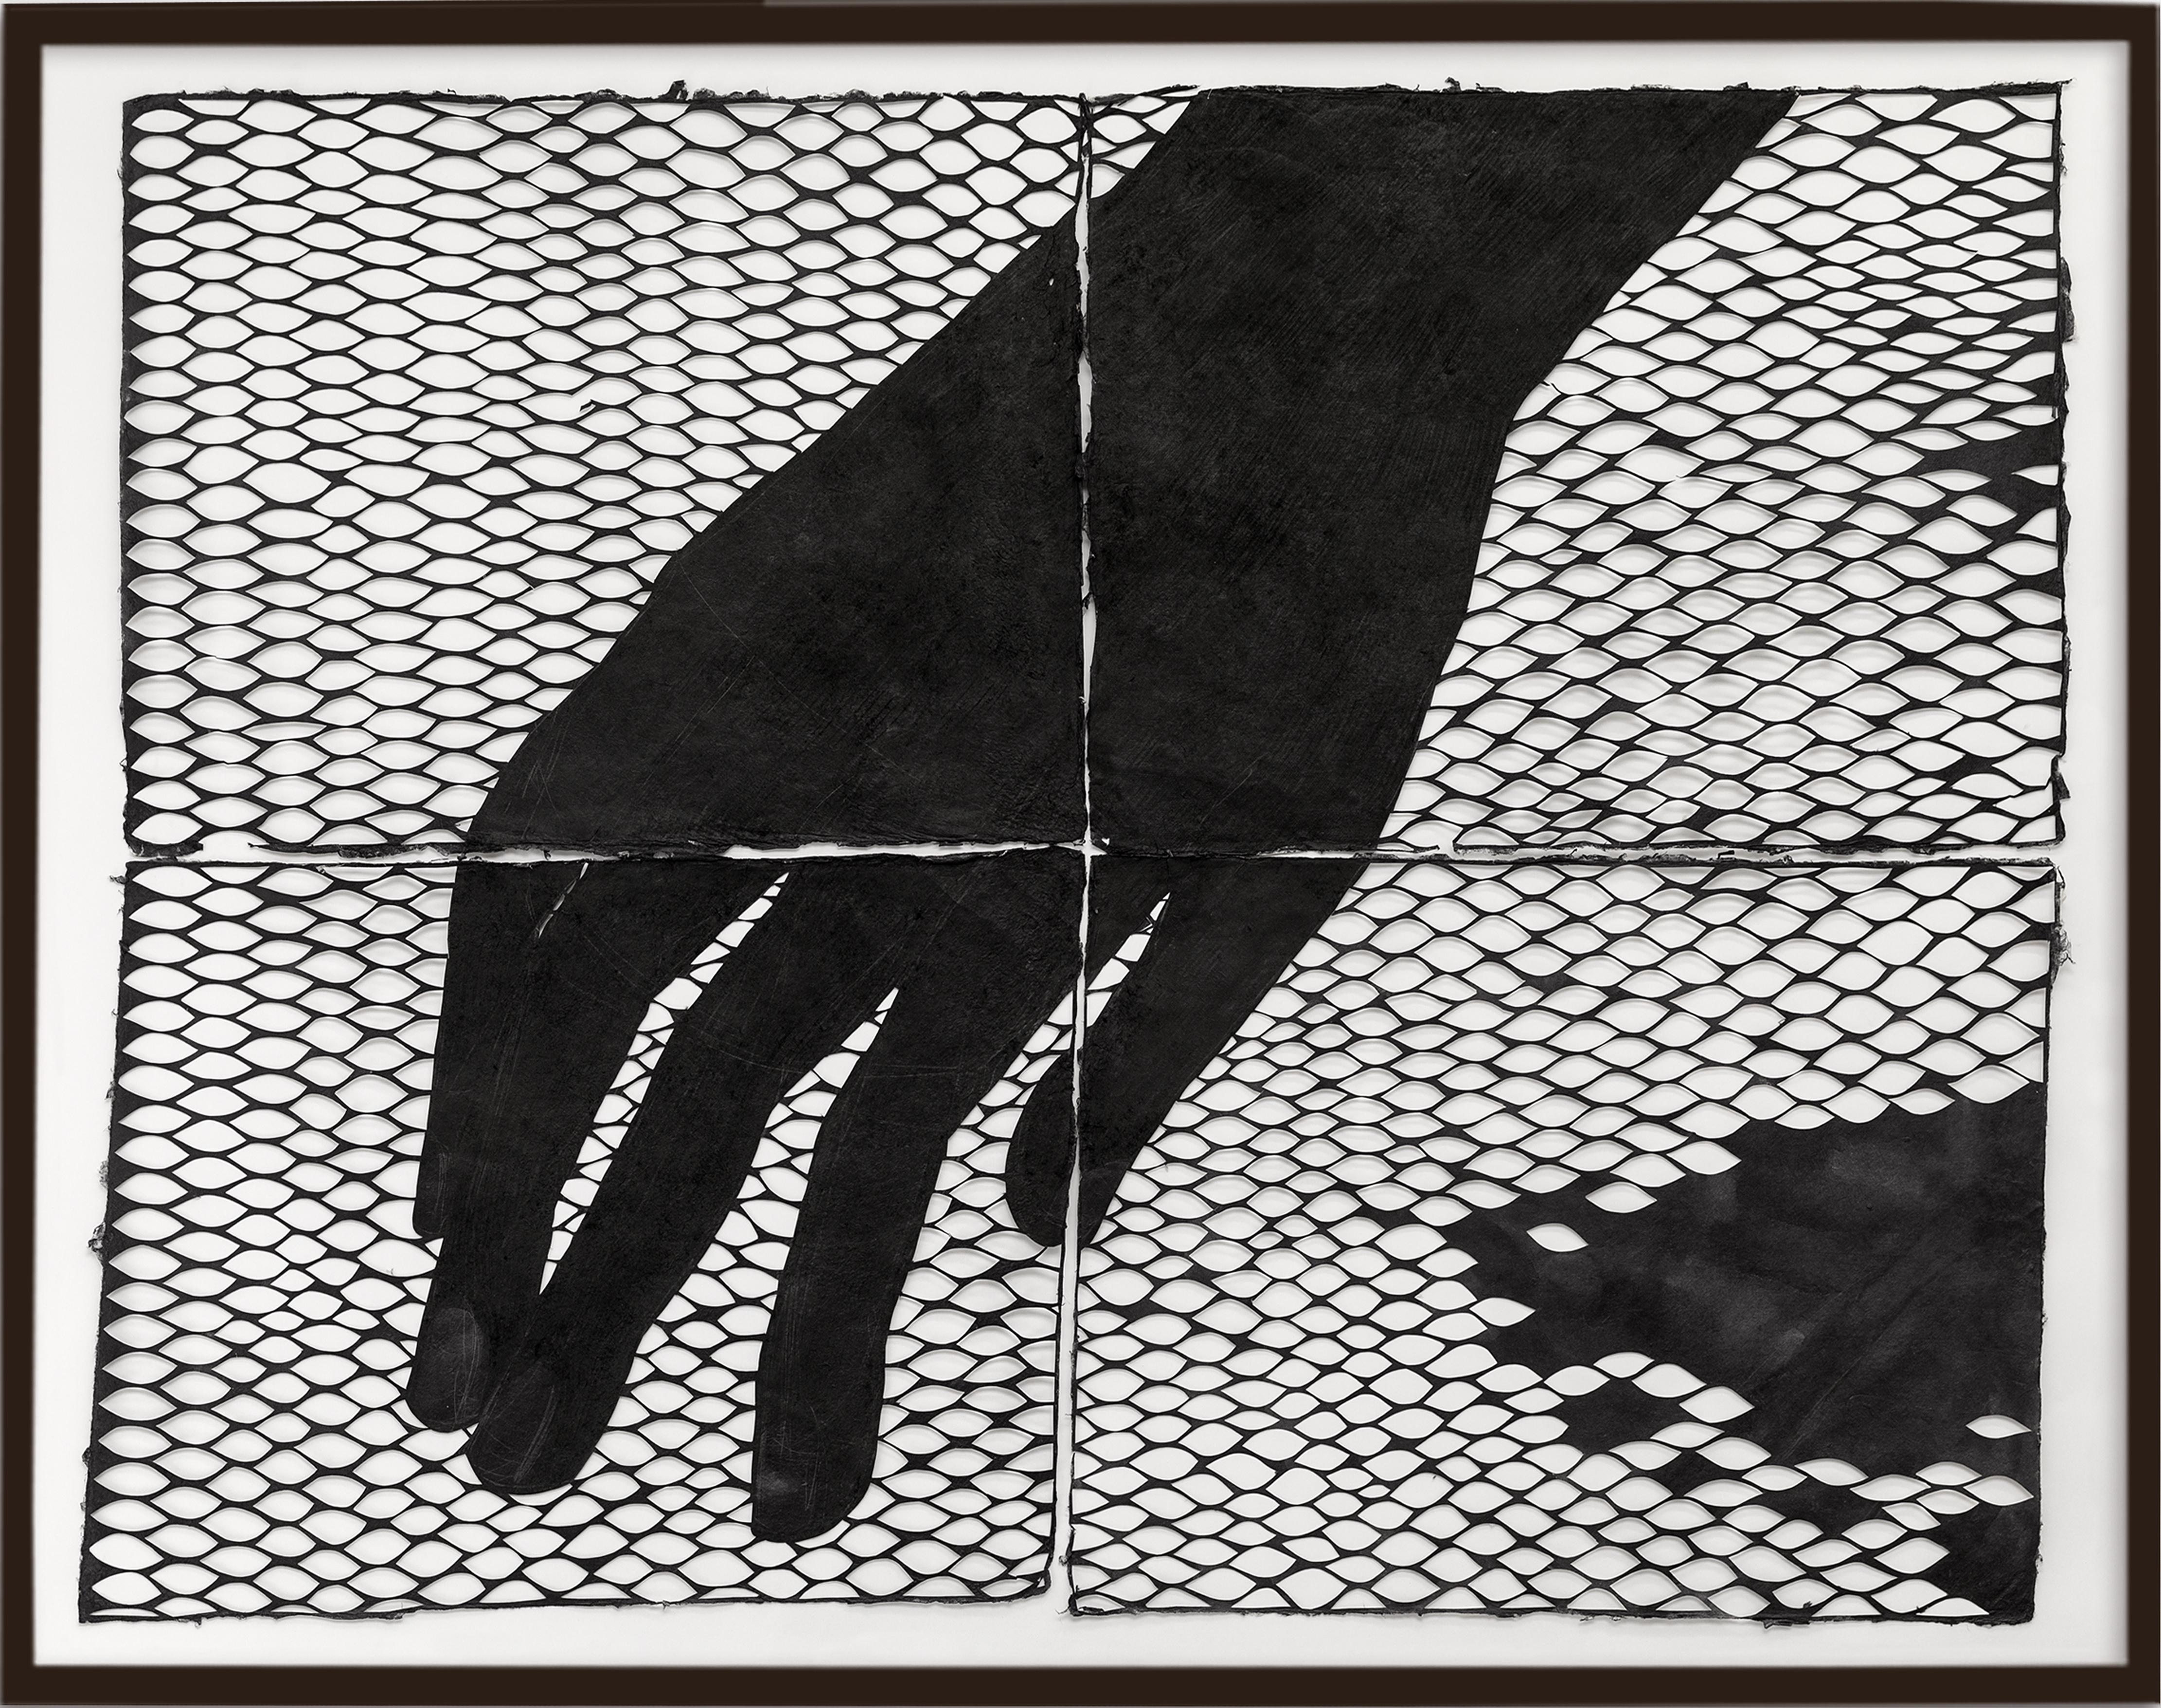 Cécilia Andrews
The Hand, 2015
Cut paper: ink, graphite, handmade paper in Laos
47 1/2 x 67 inches

